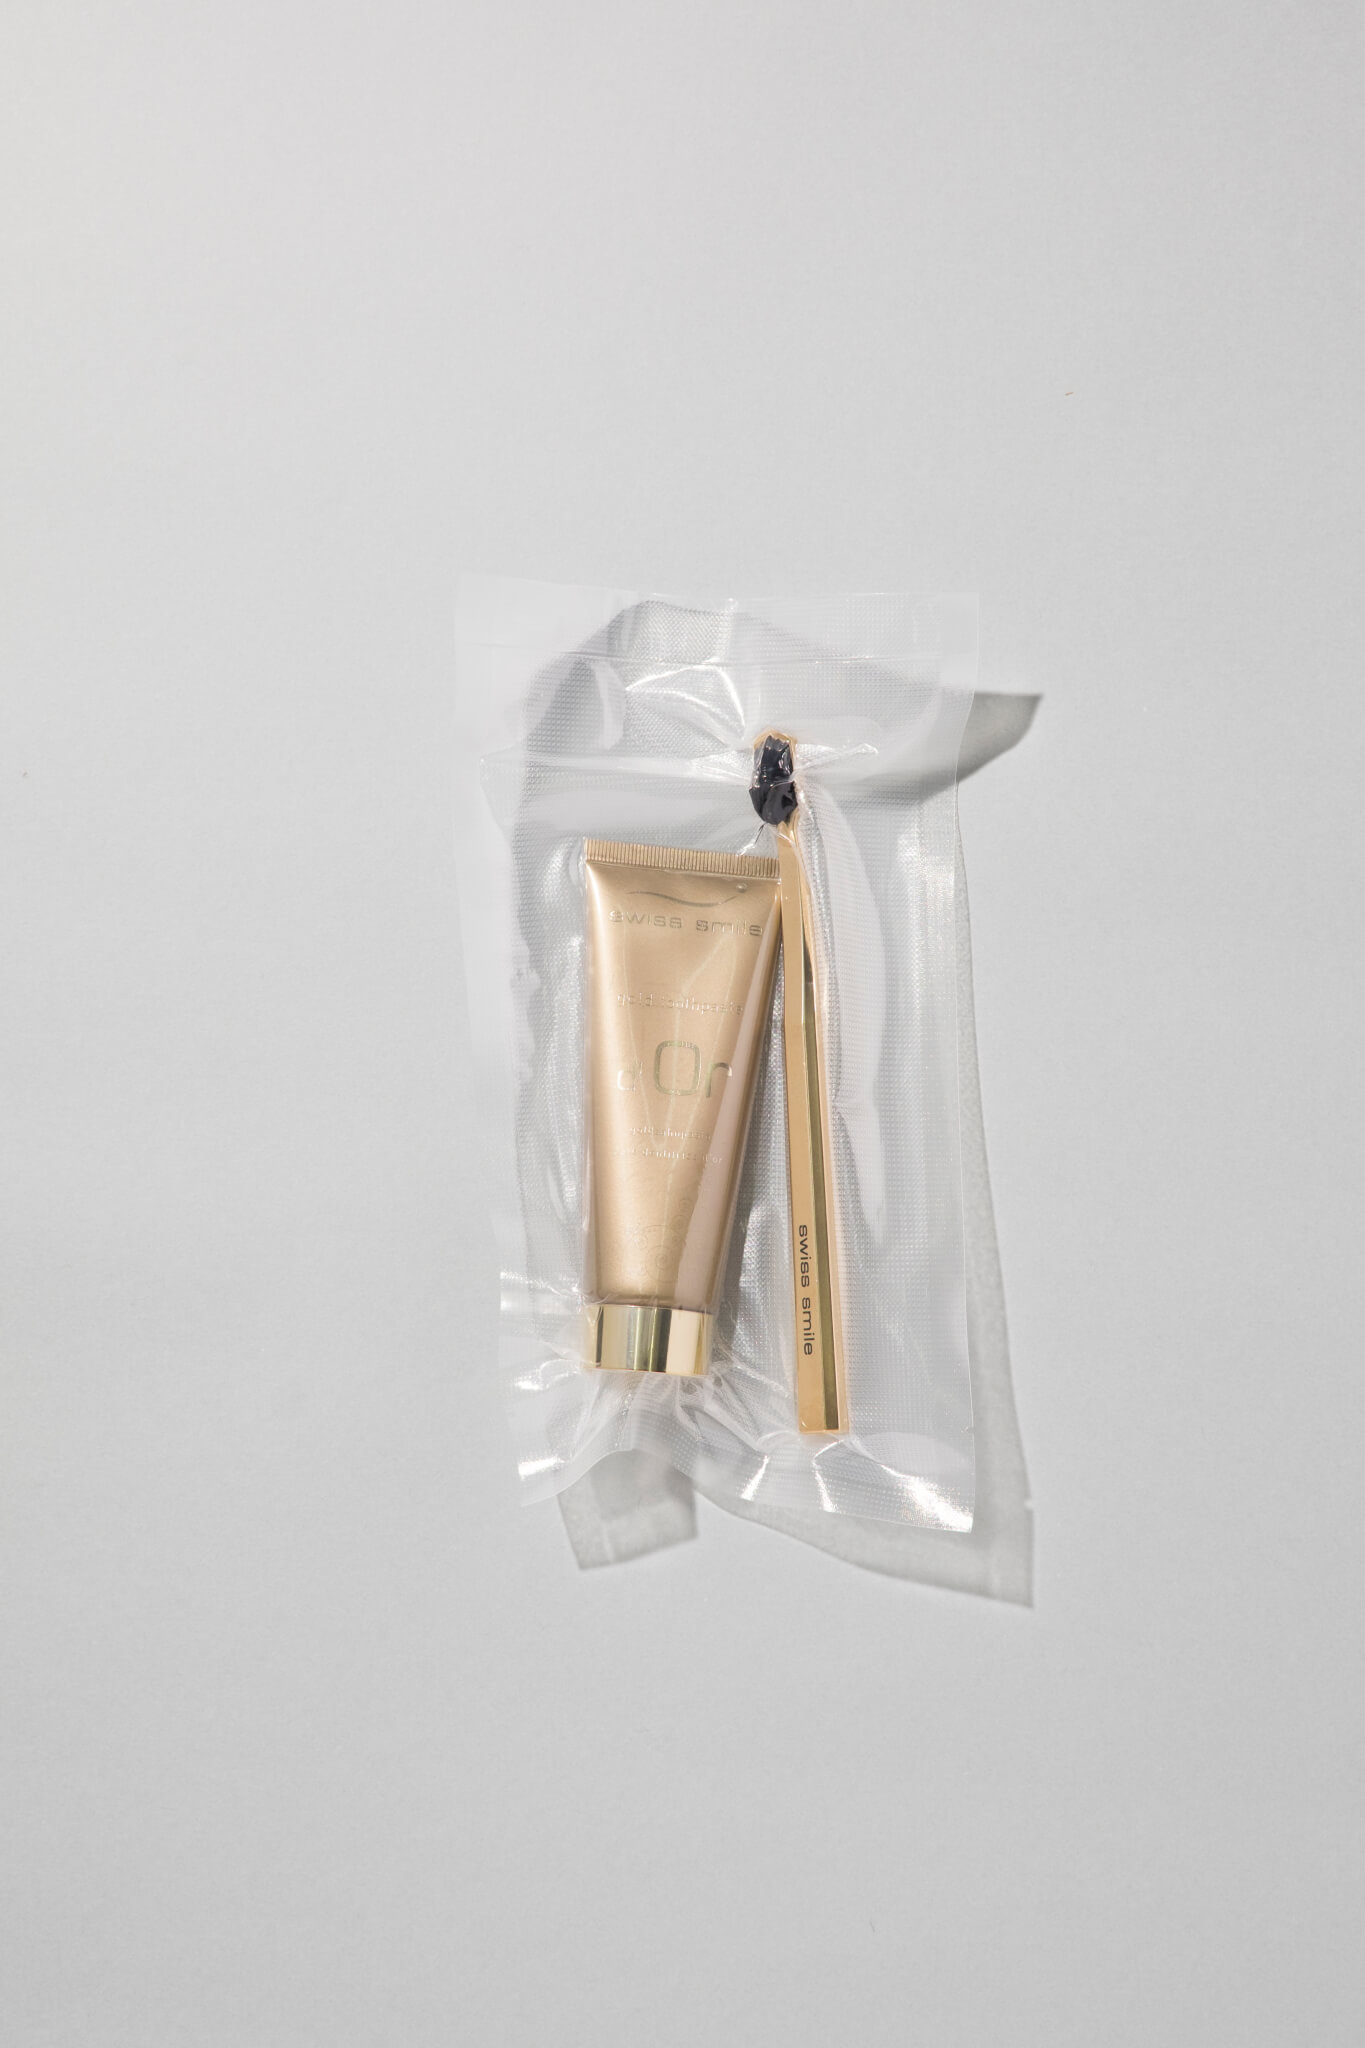 Swiss Smile D'or Gold Toothbrush 75ml &Goldplated Toothpaste $890（Joyce Beauty）